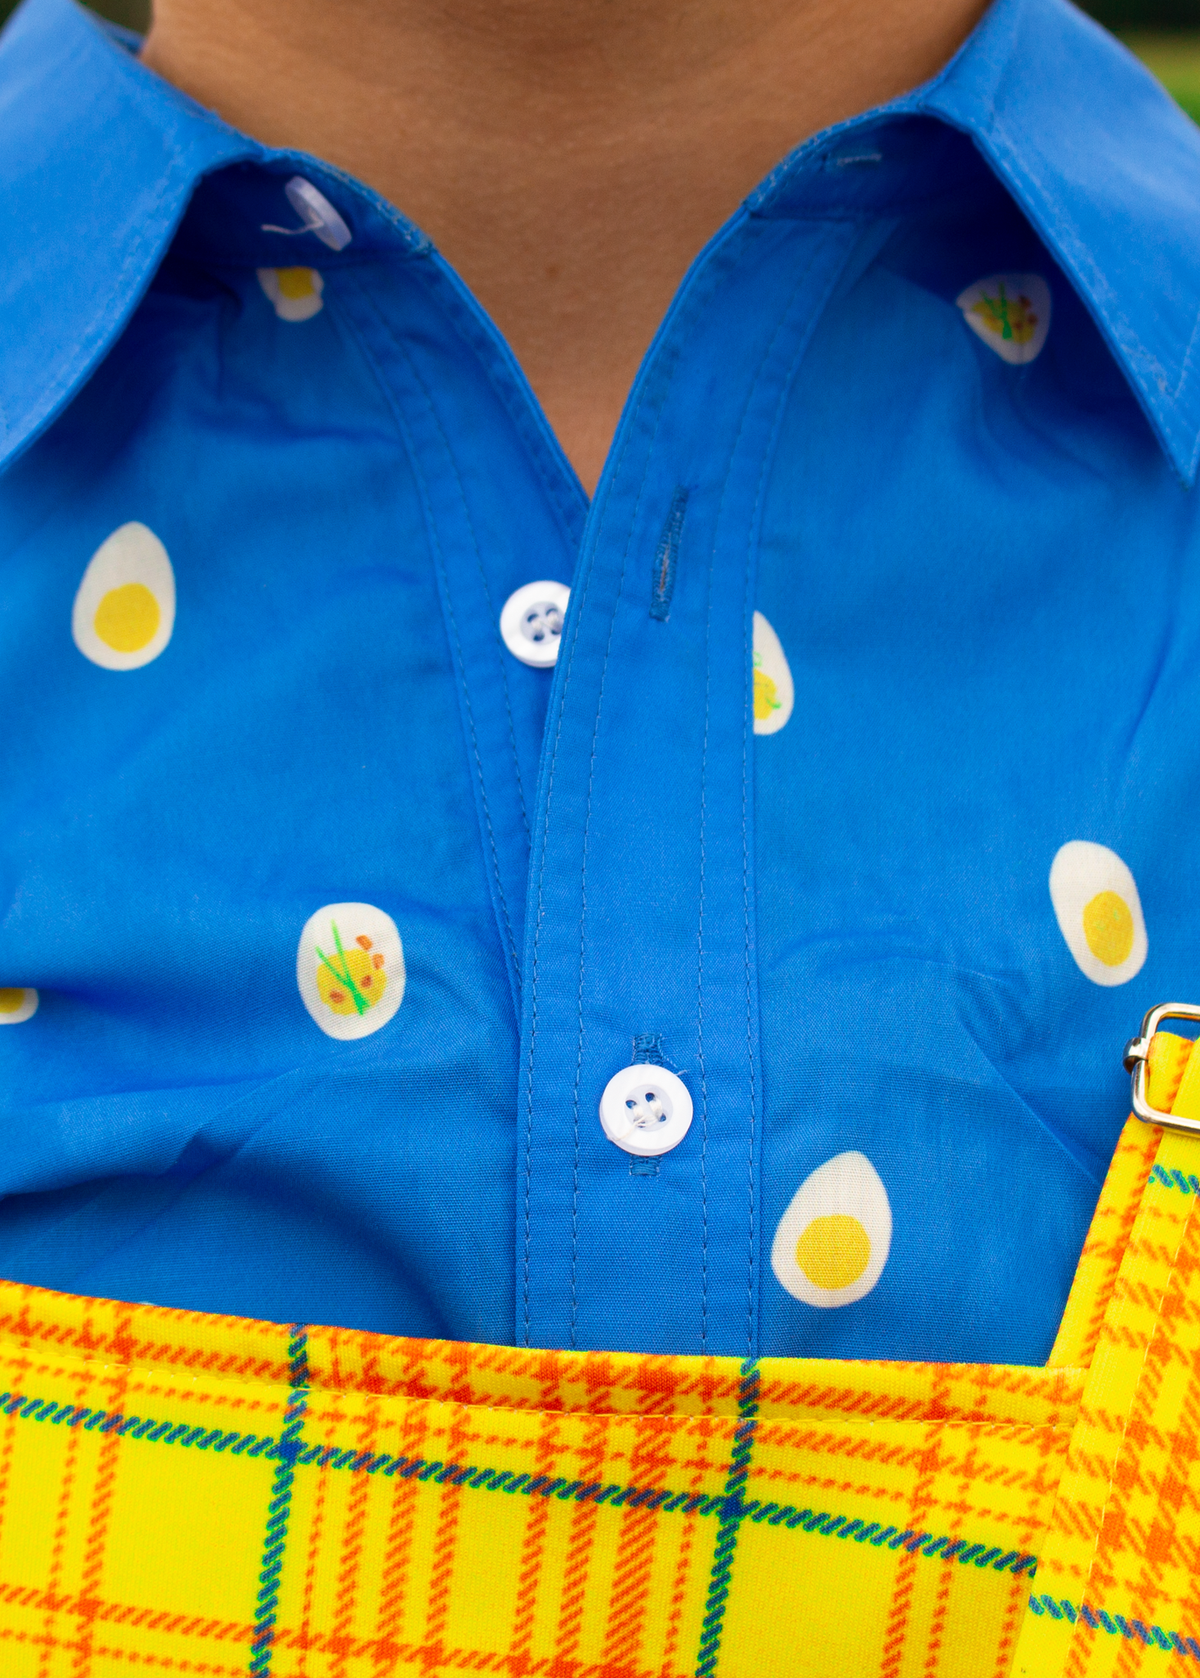 Deviled Egg Long Sleeve Button Up